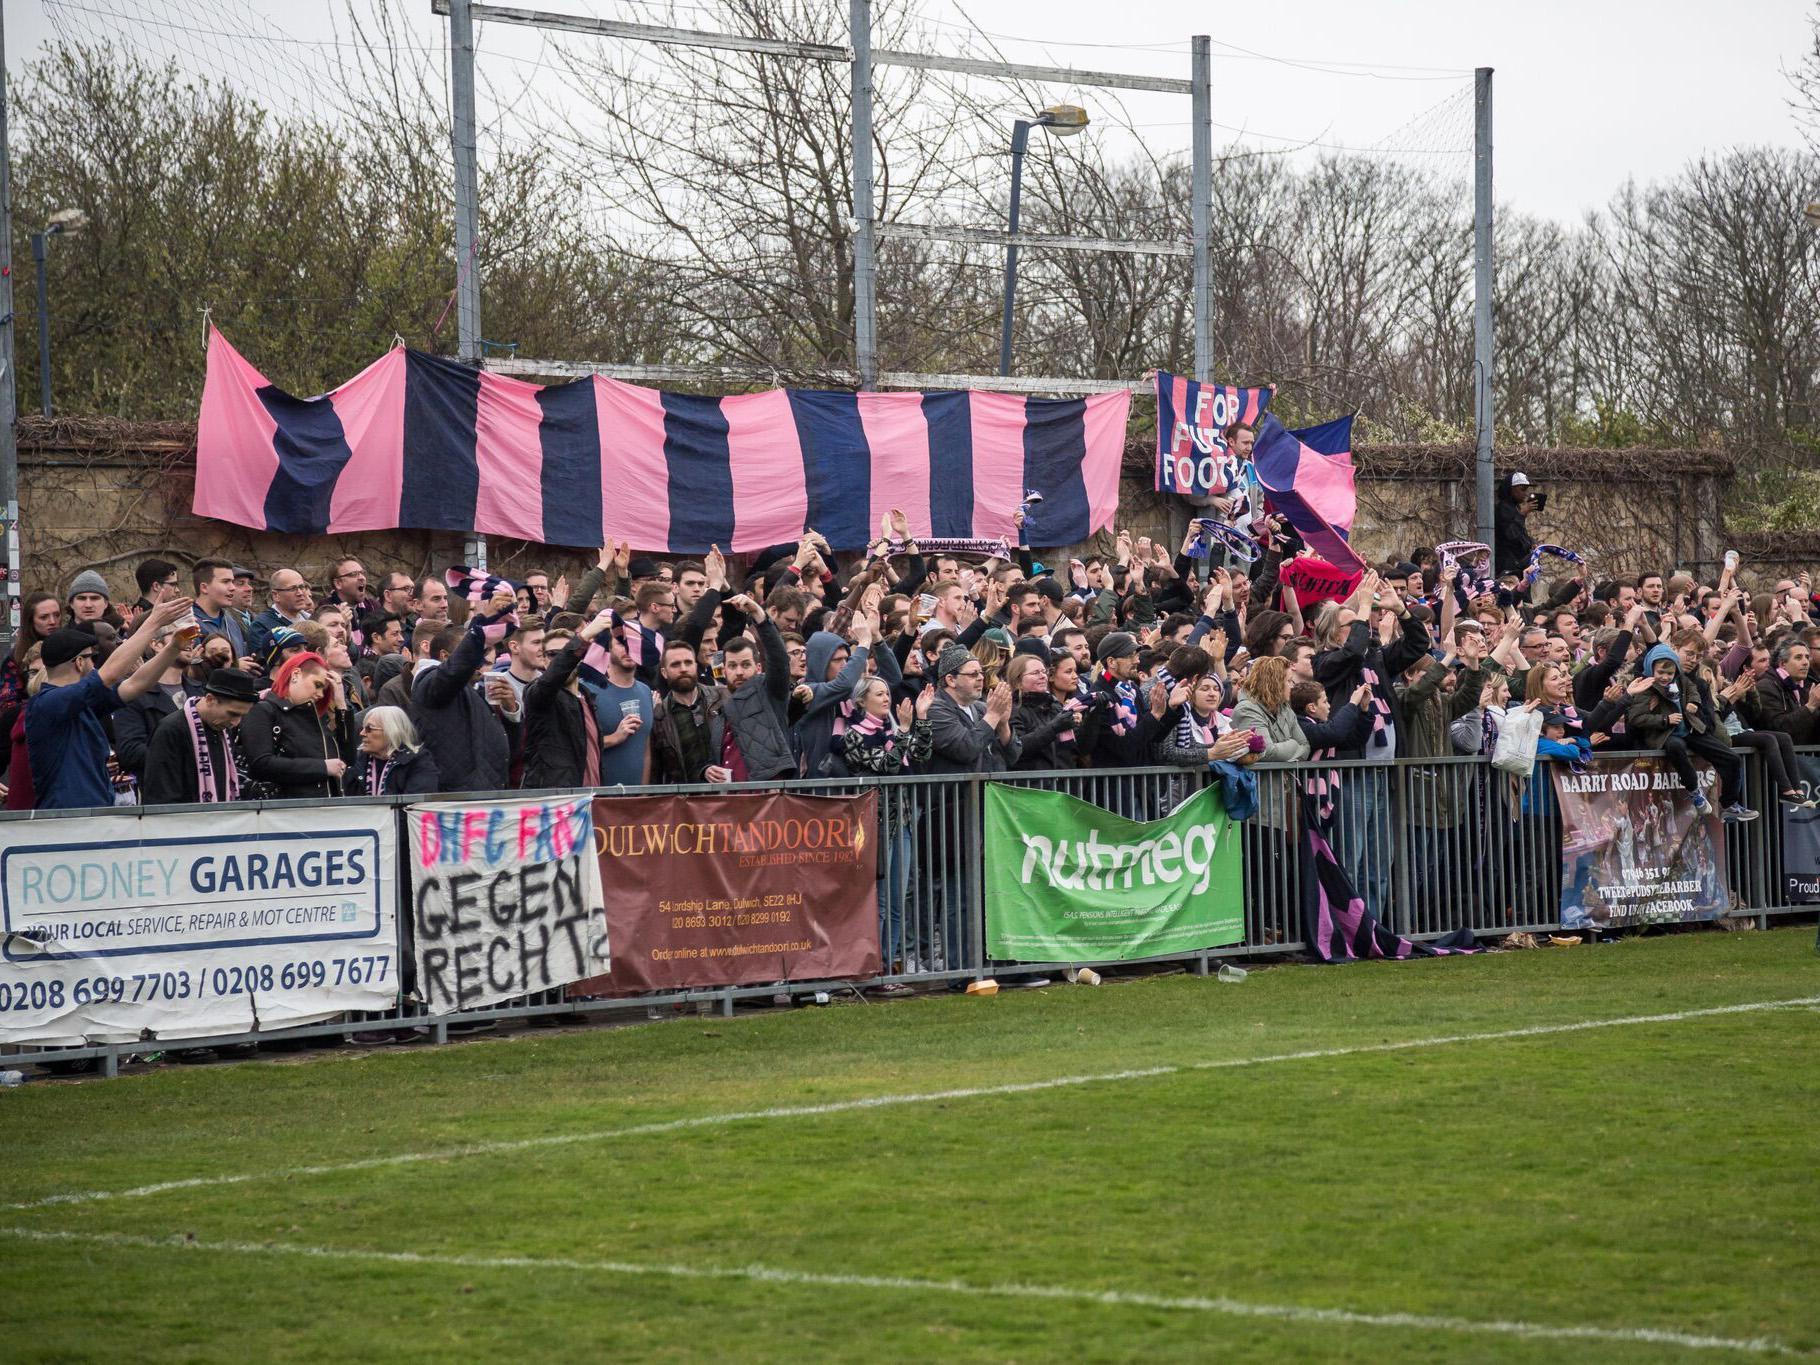 Dulwich are in the process of seeking a new home to play their remaining six home games of the season